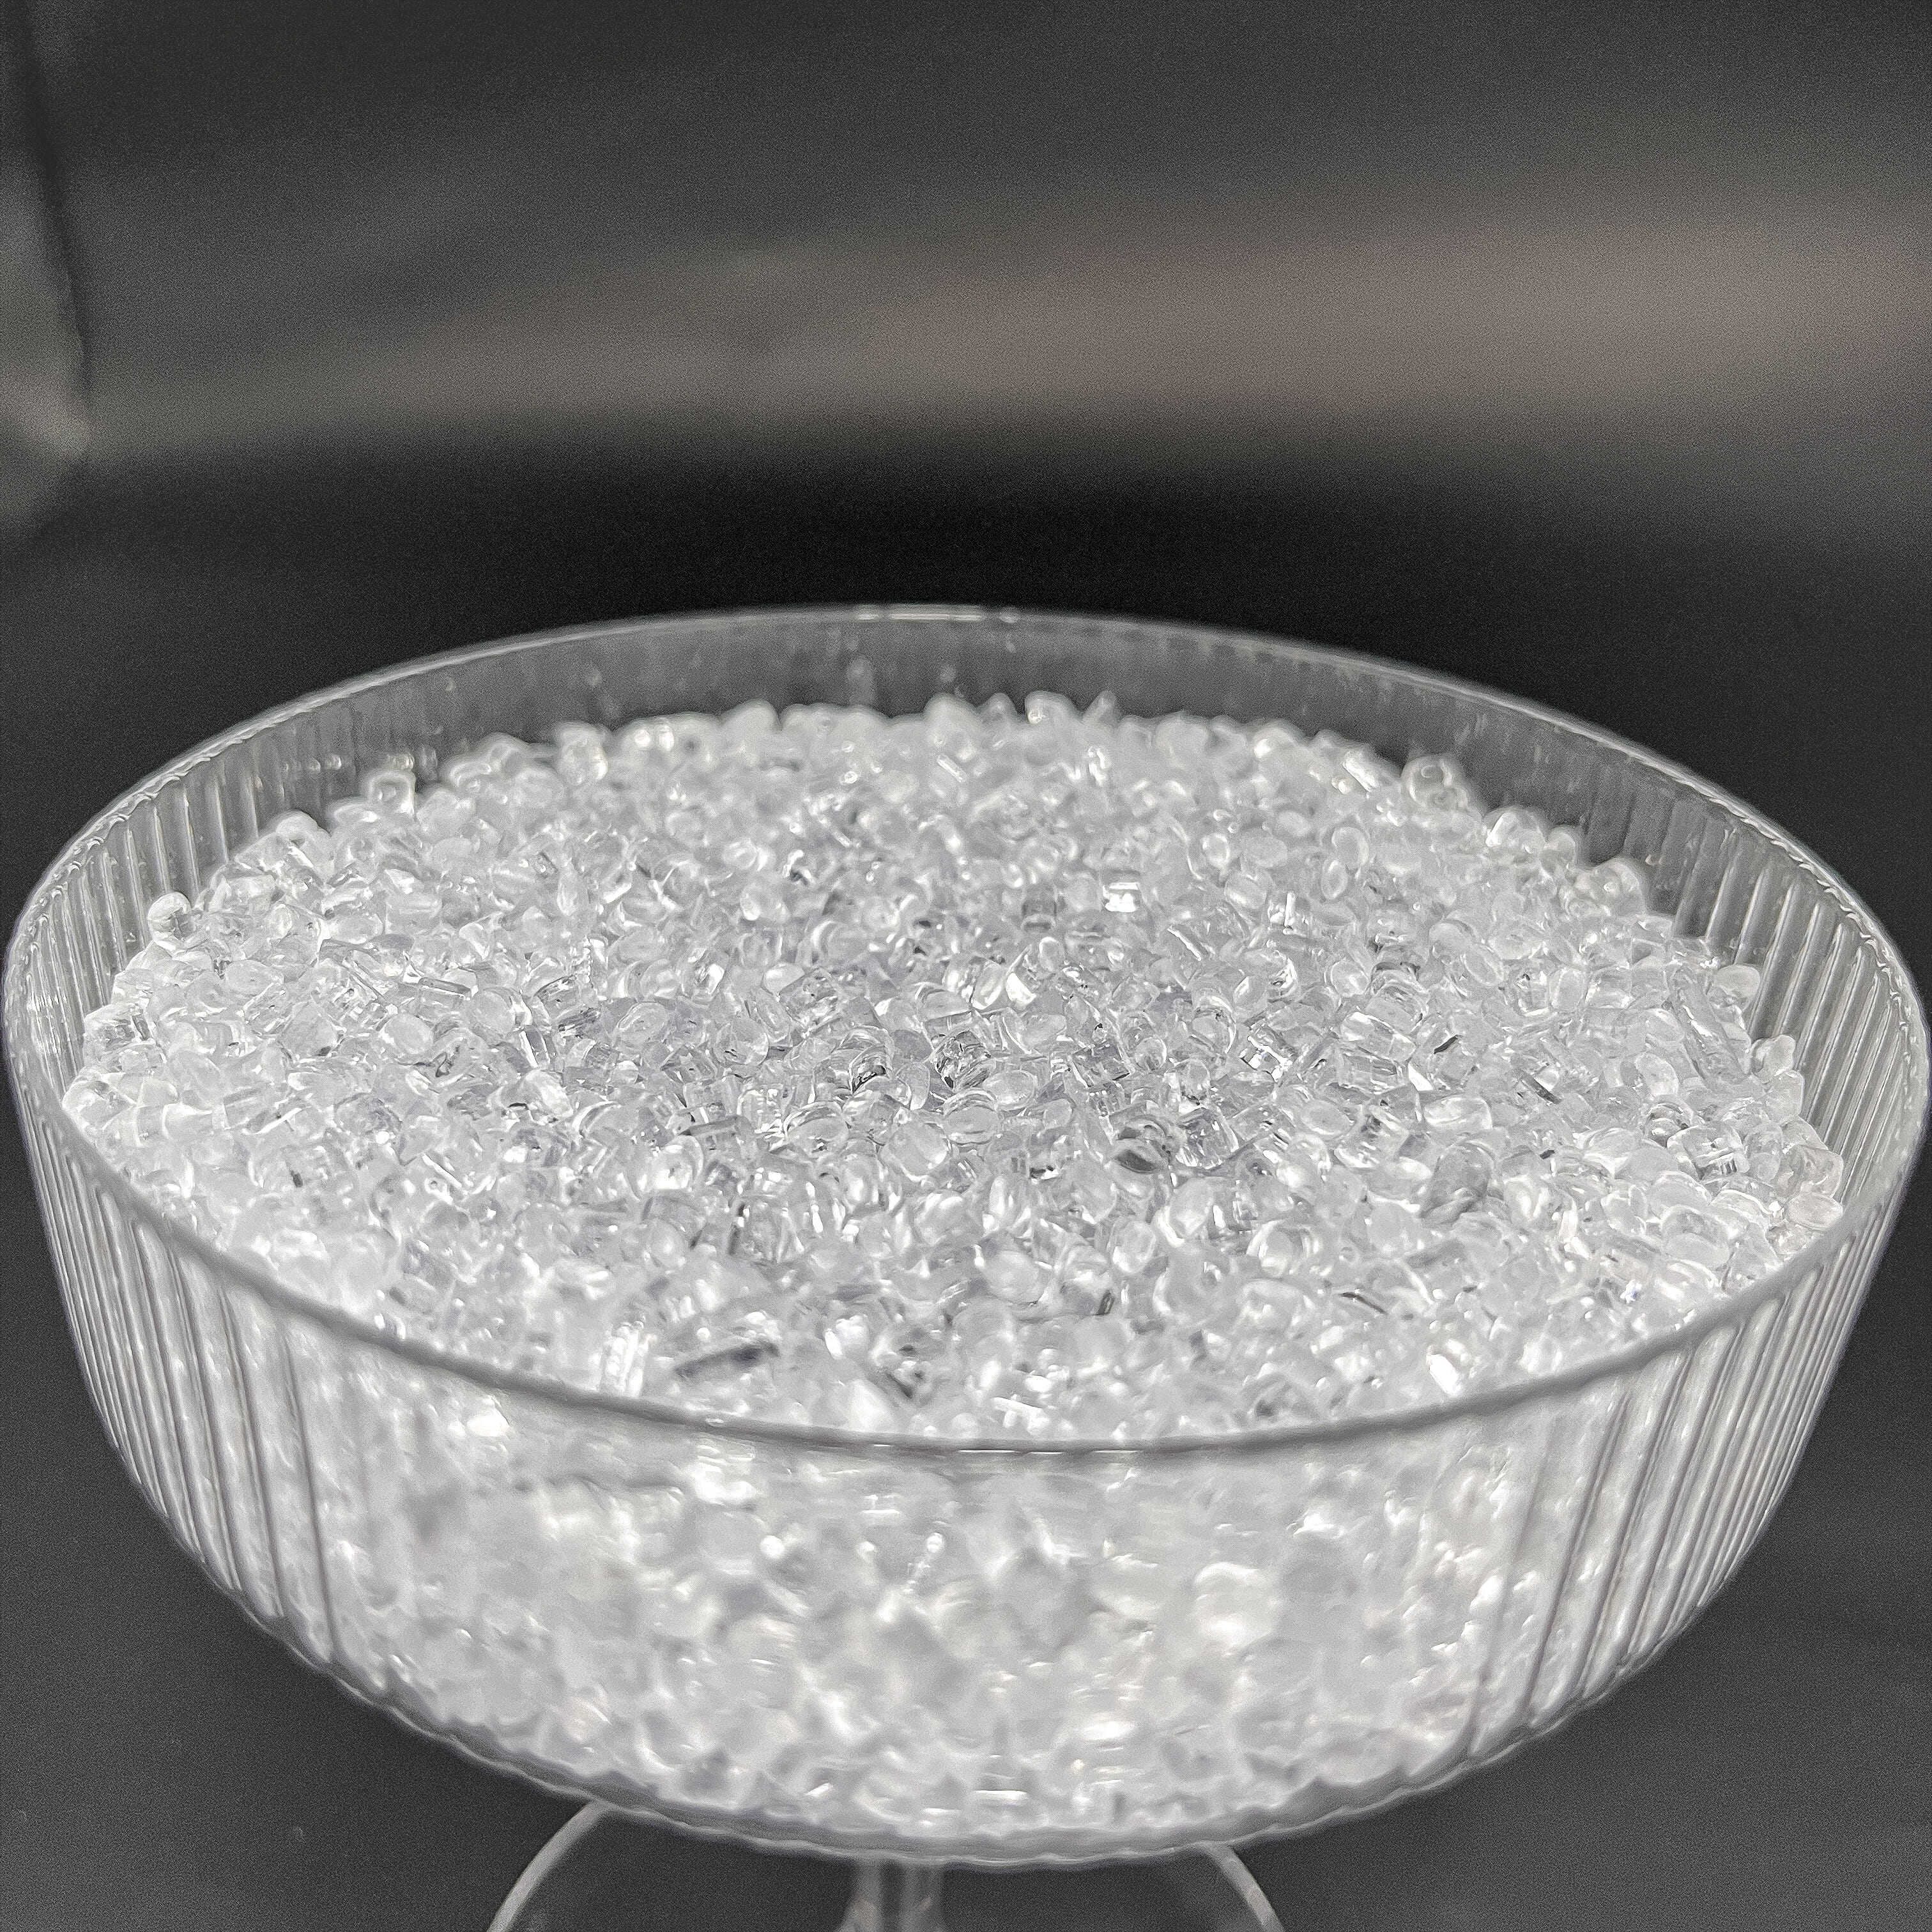 abs vs polycarbonate plastic, polycarbonate granules price, what is polycarbonate resin, raw plastic granules